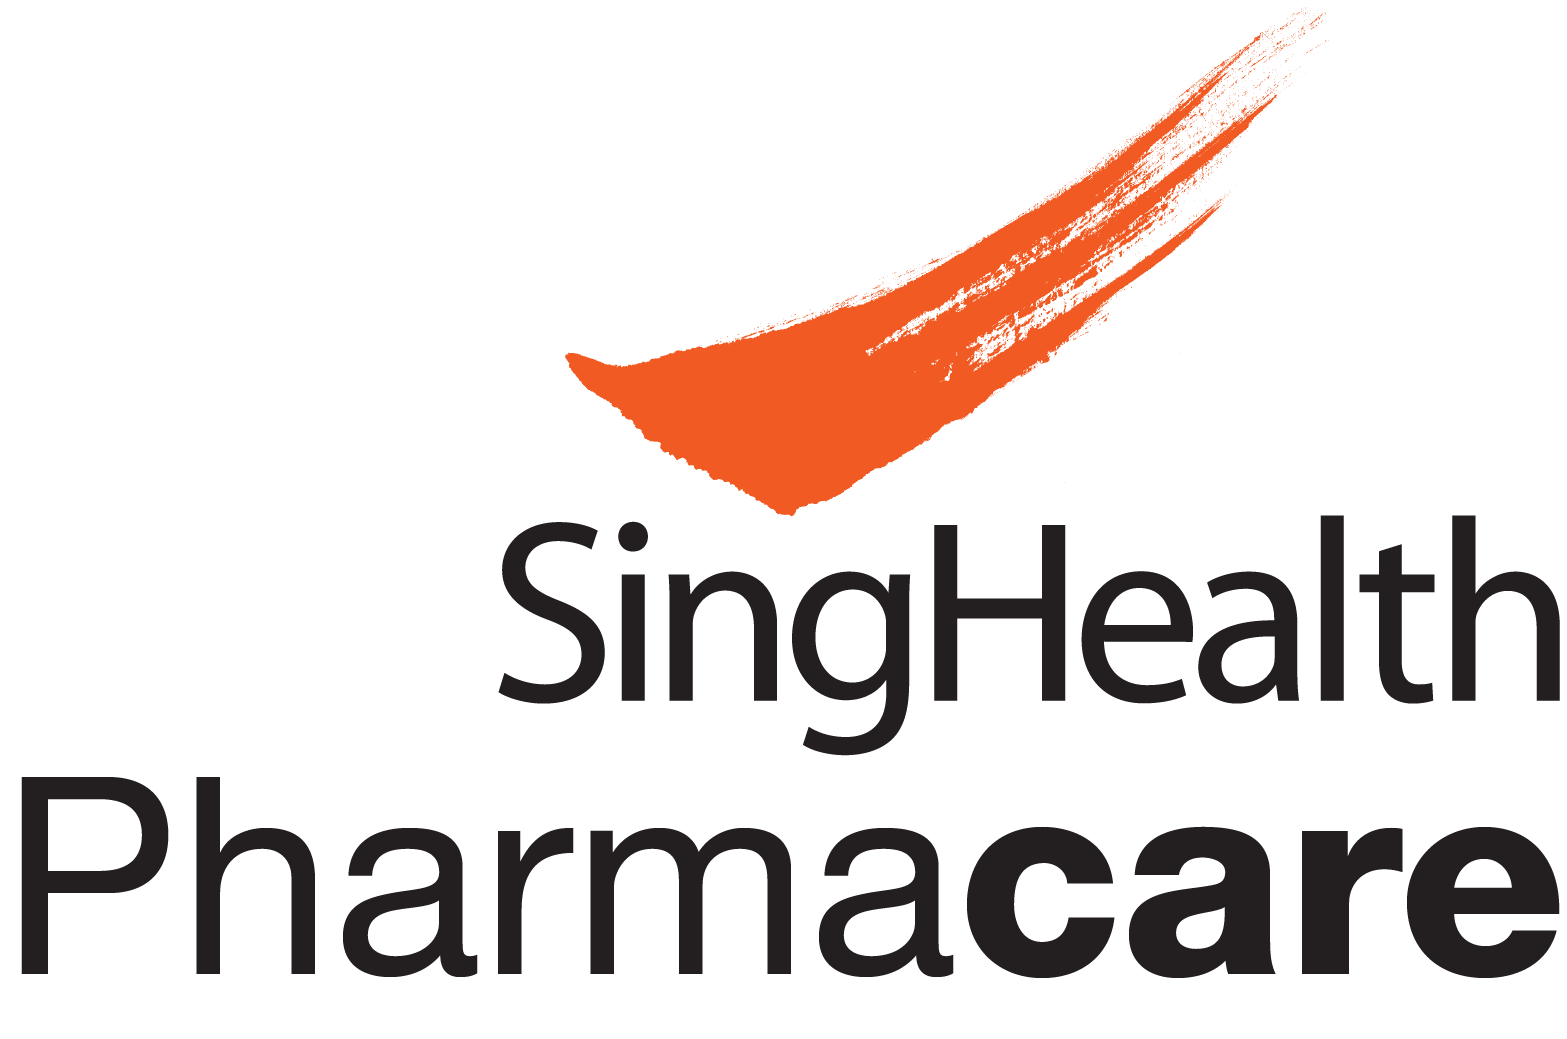 SingHealthPharmacare_colour.png